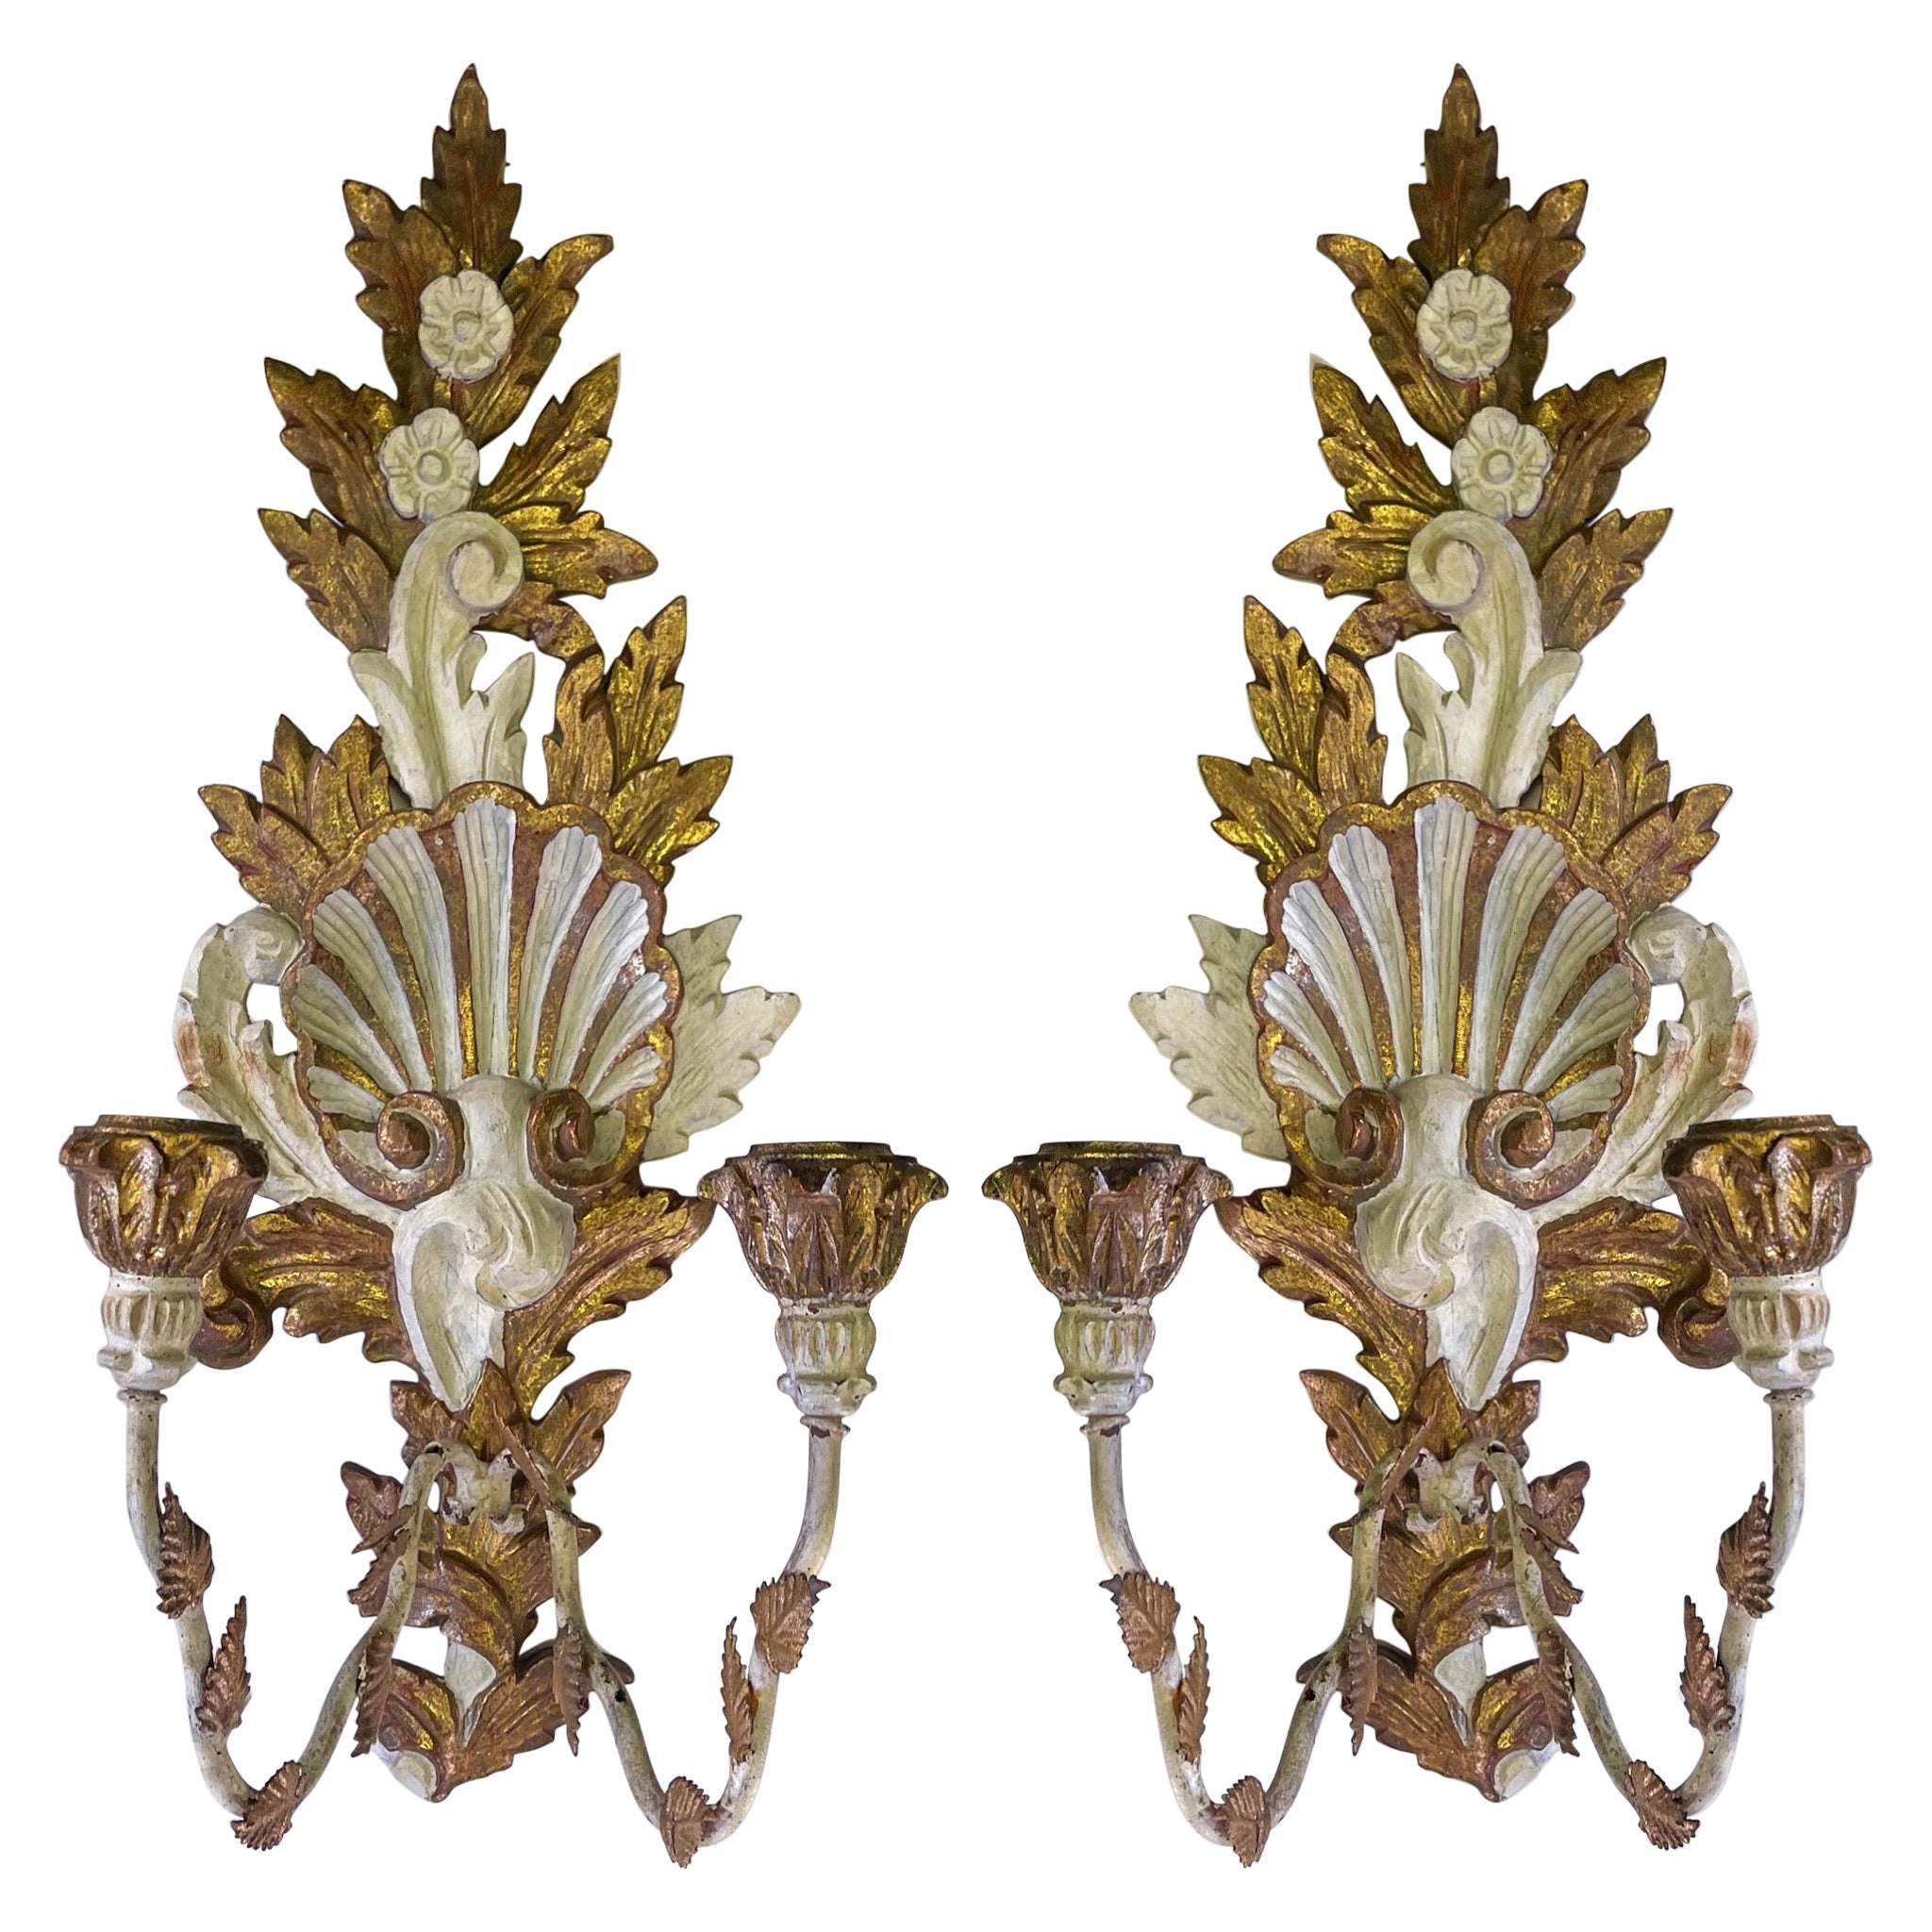 Italian Giltwood And Painted Carved Sconces With Shell And Floral Motif, Pair For Sale